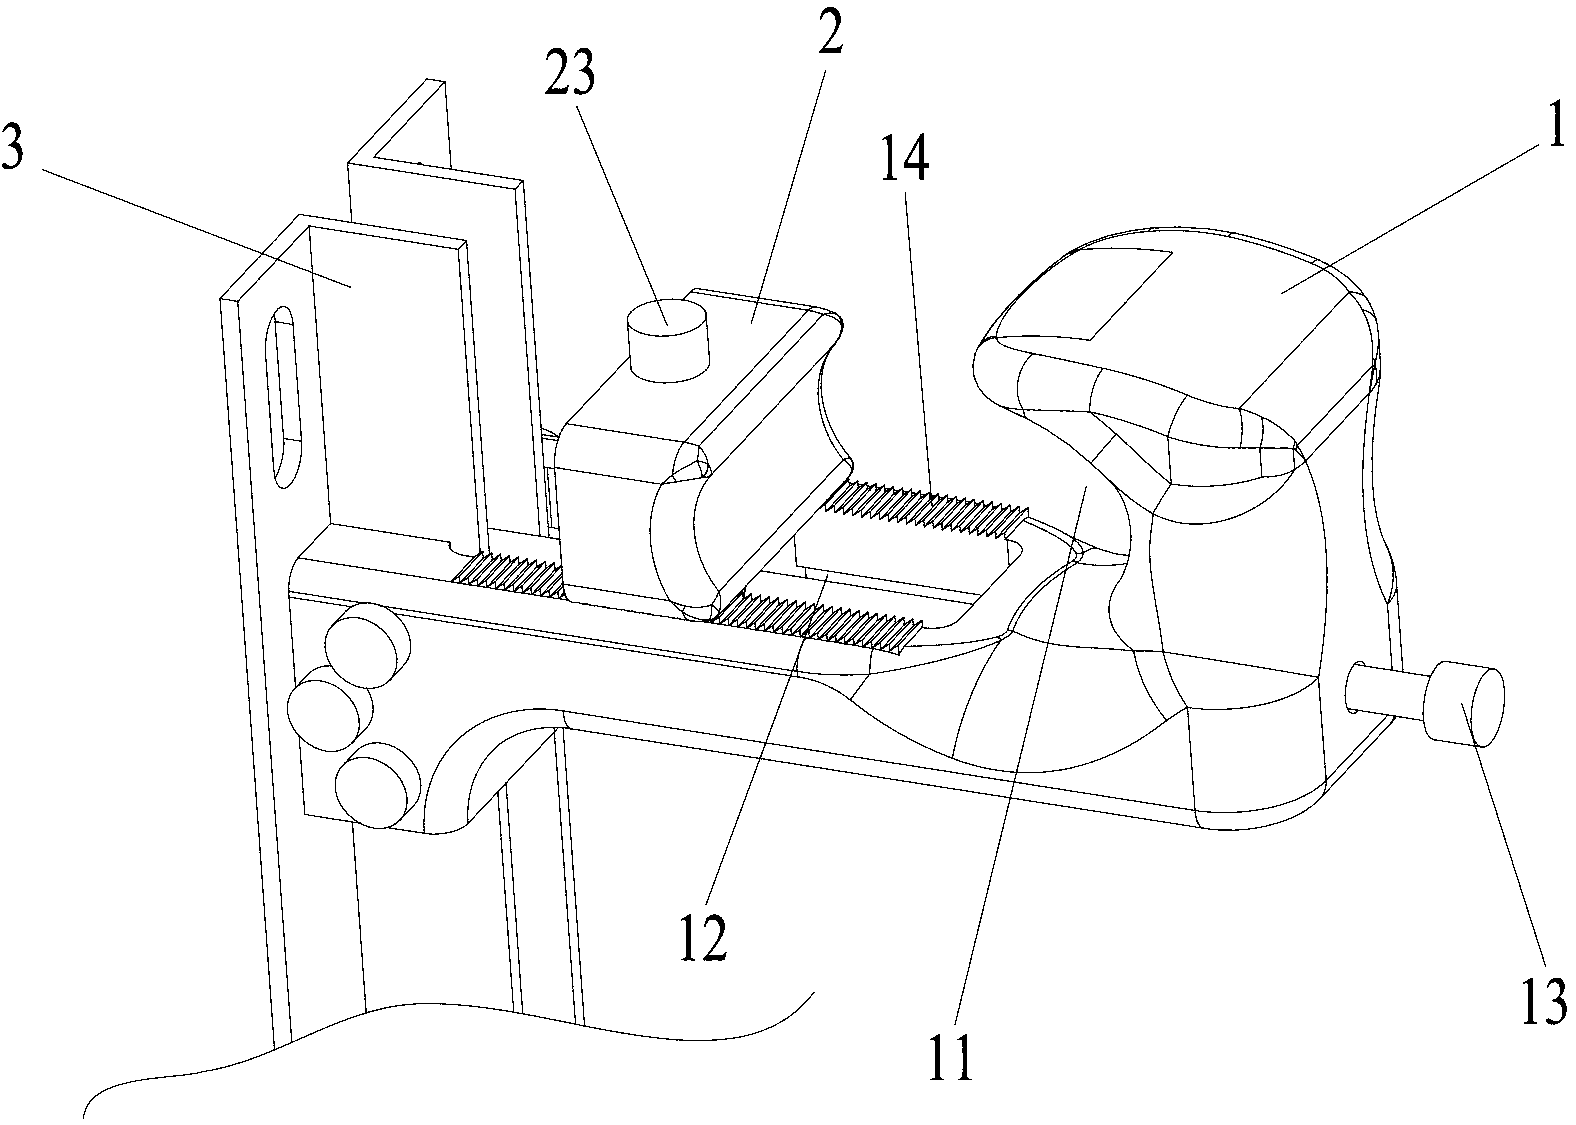 Device for quickly mounting cable